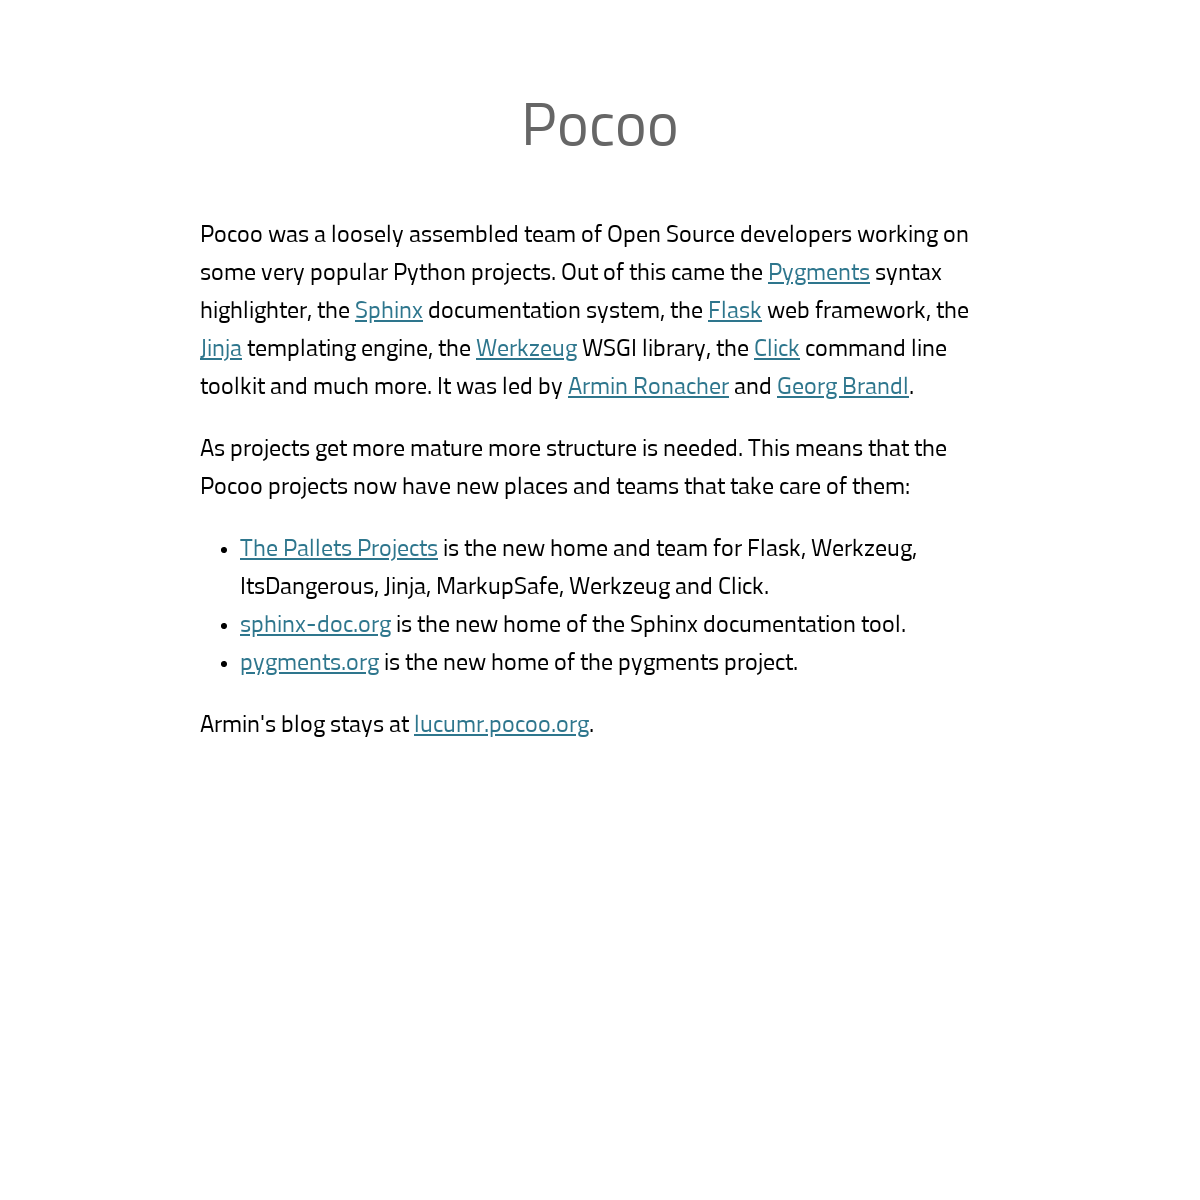 A complete backup of pocoo.org